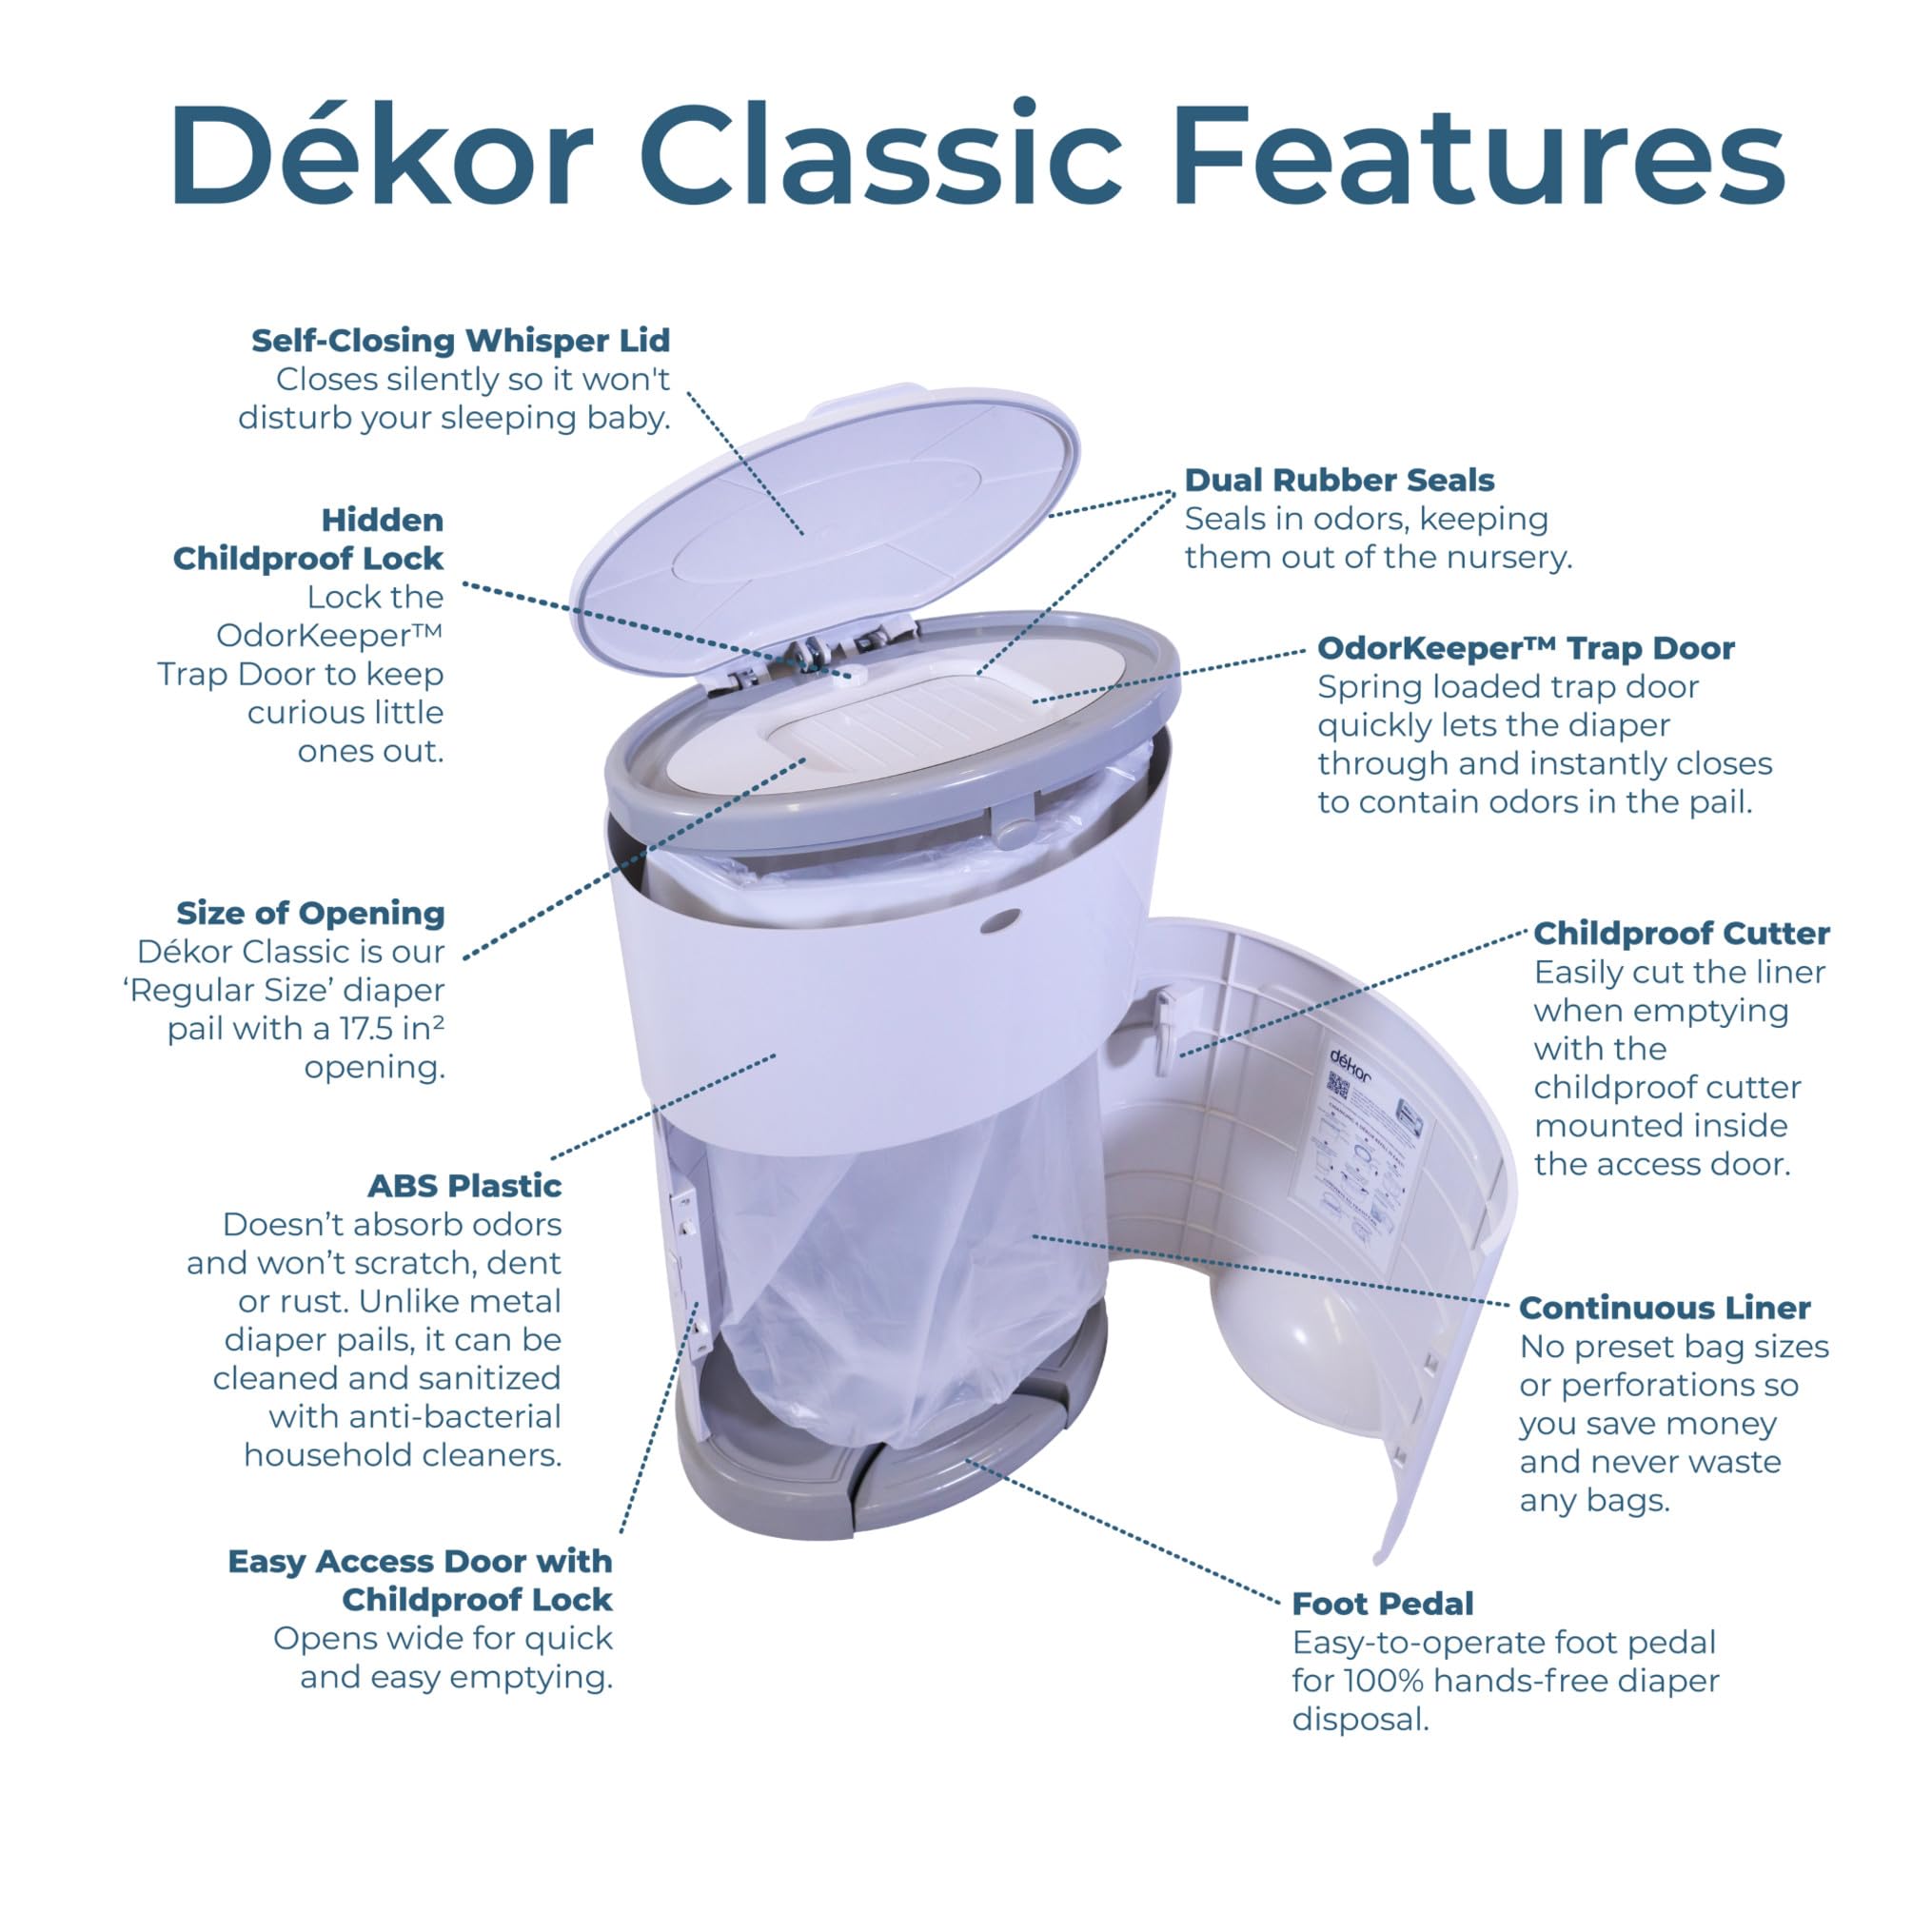 Dekor Classic Hands-Free Diaper Pail | White | Easiest to Use | Just Step – Drop – Done | Doesn’t Absorb Odors | 20 Second Bag Change | Most Economical Refill System